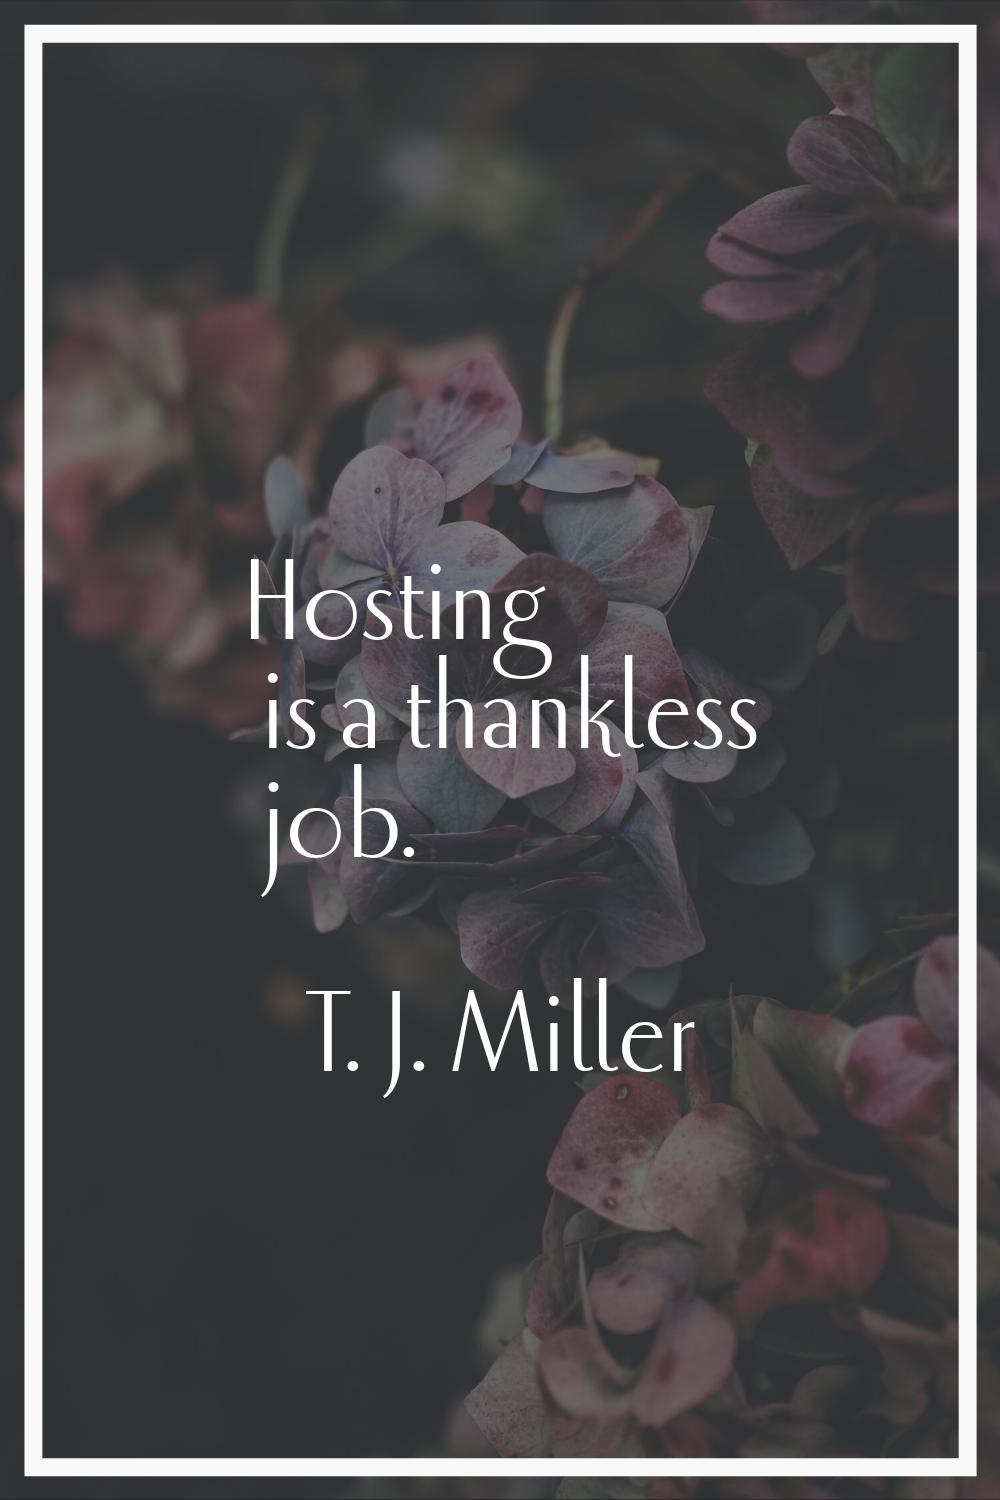 Hosting is a thankless job.